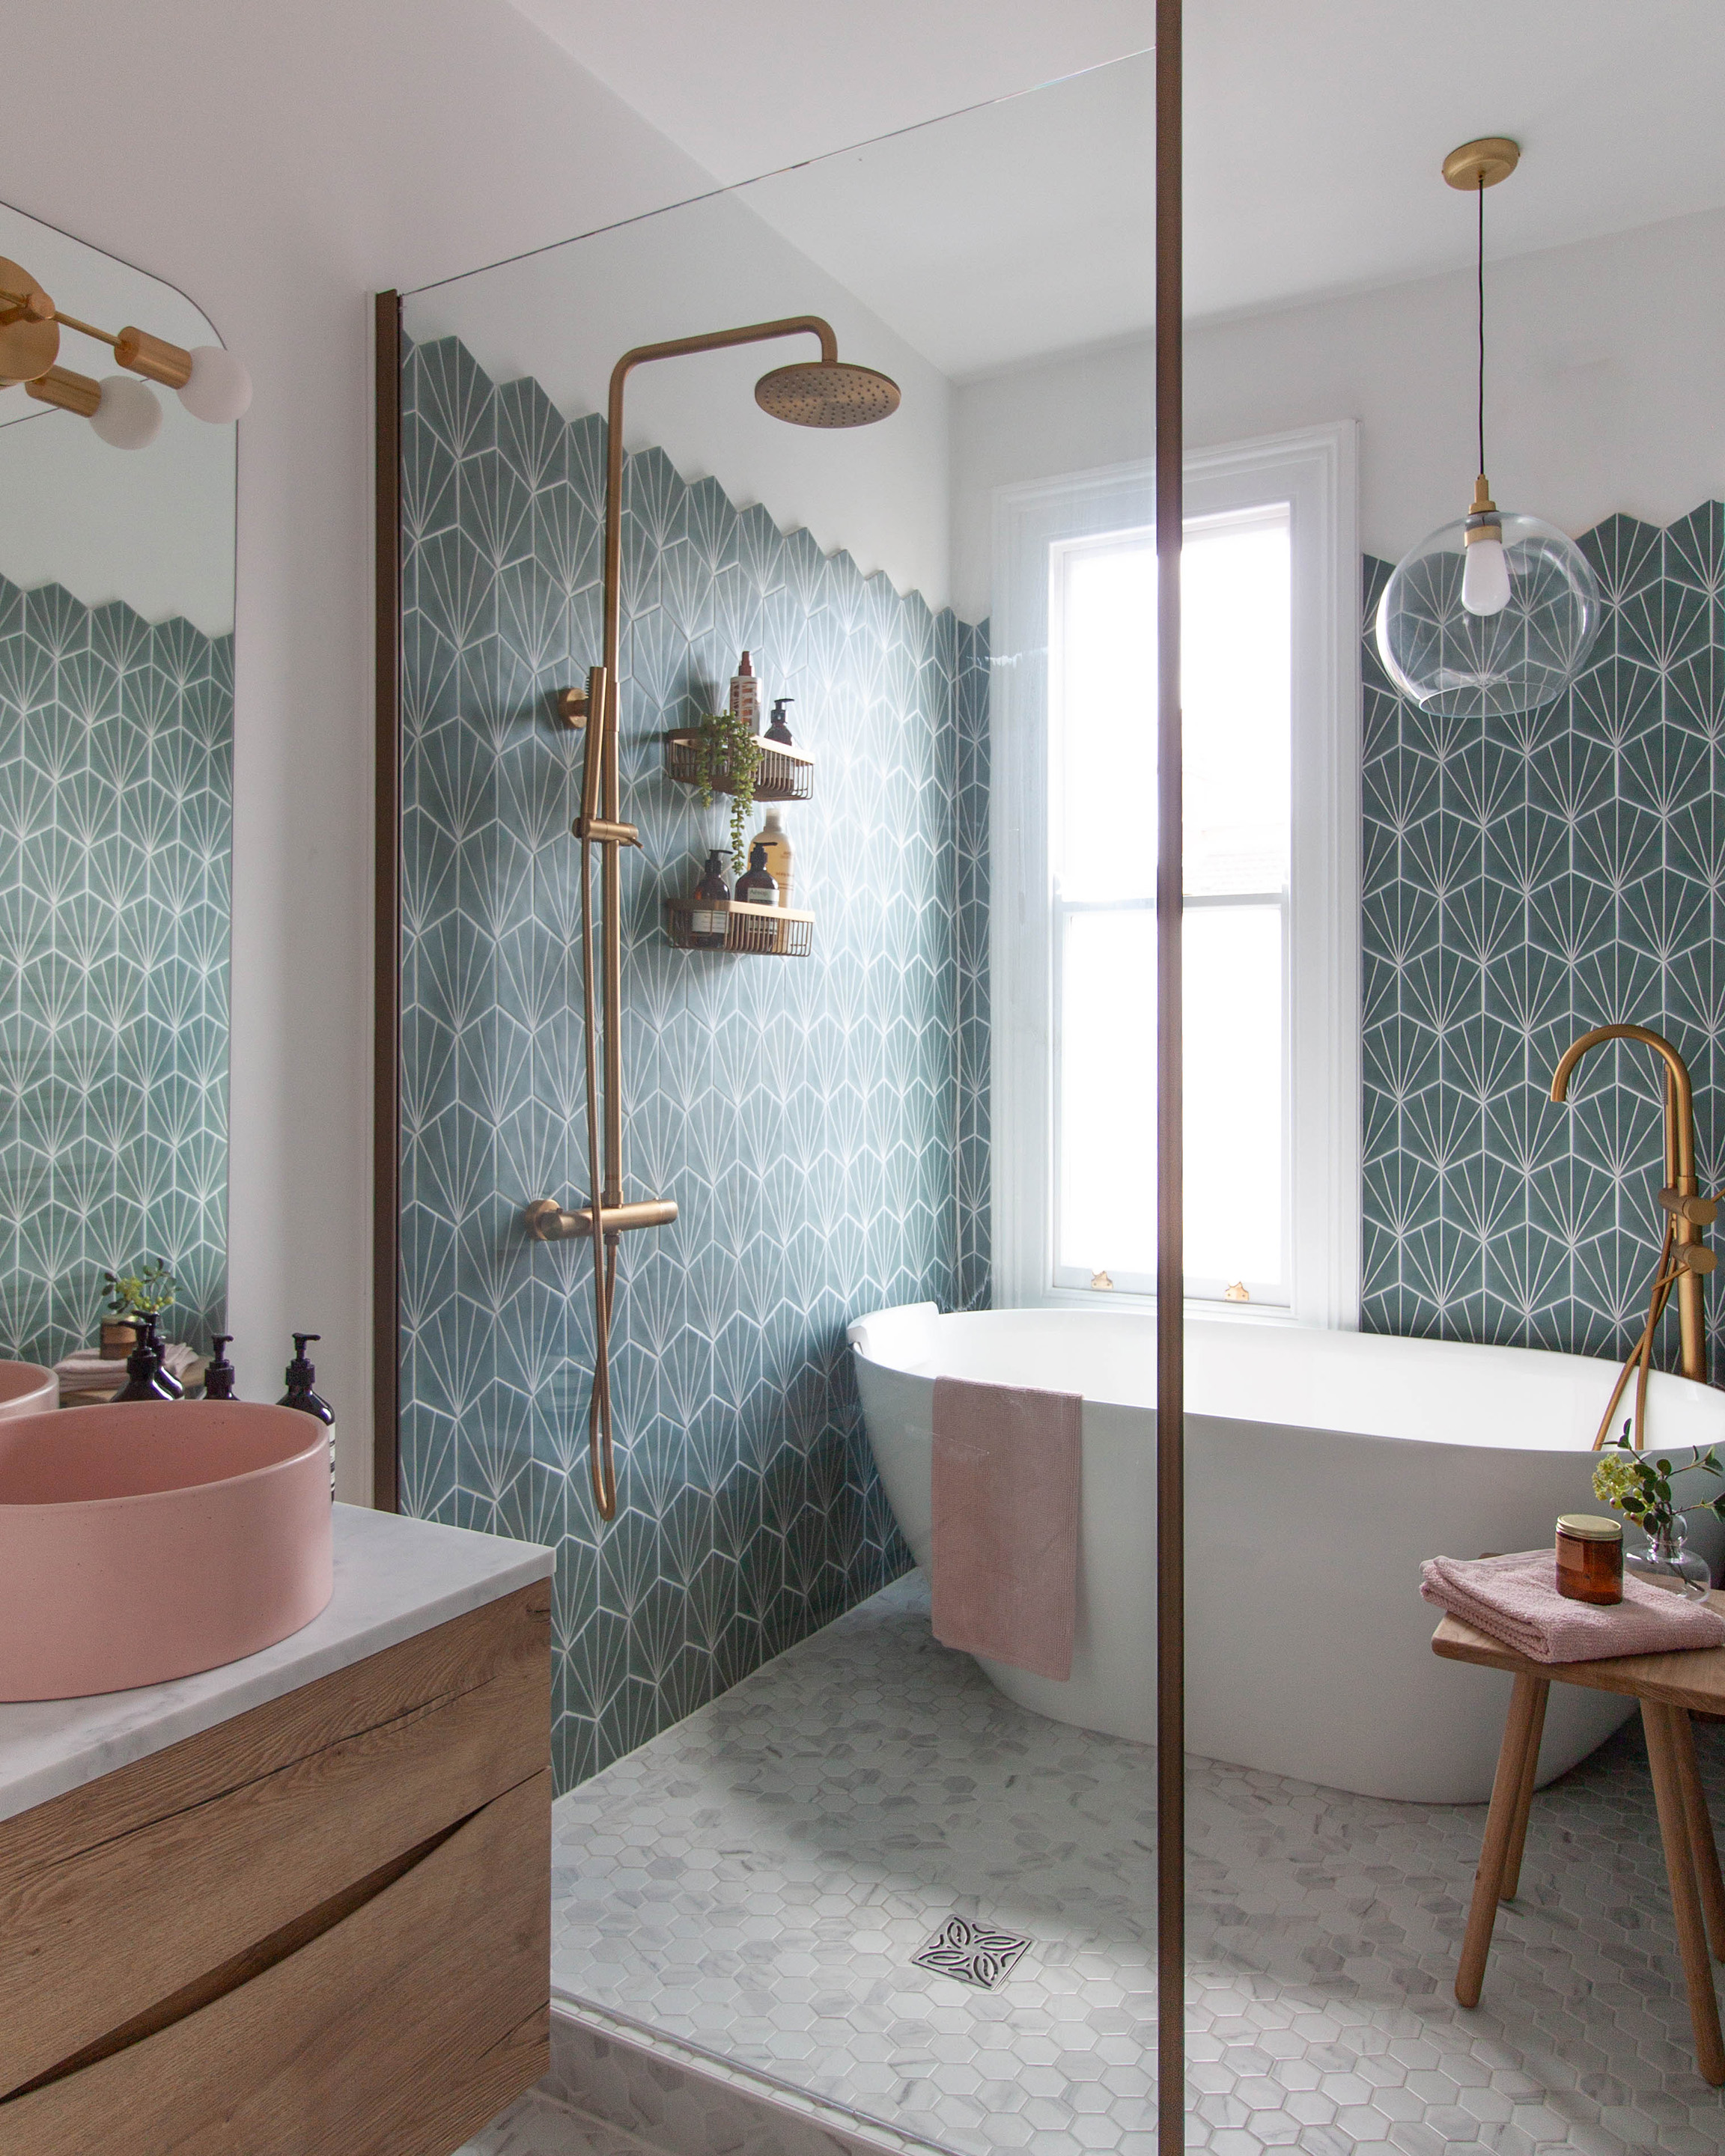 A snapshot of a wetroom area in a small victorian bathroom in Leamington Spa. Showing Hexagonal teal wall tiles, marble mosaic floor tiles, a brushed gold shower with rainfall head and a pink concrete basin. A Bathroom Pendant light hangs over the bath.